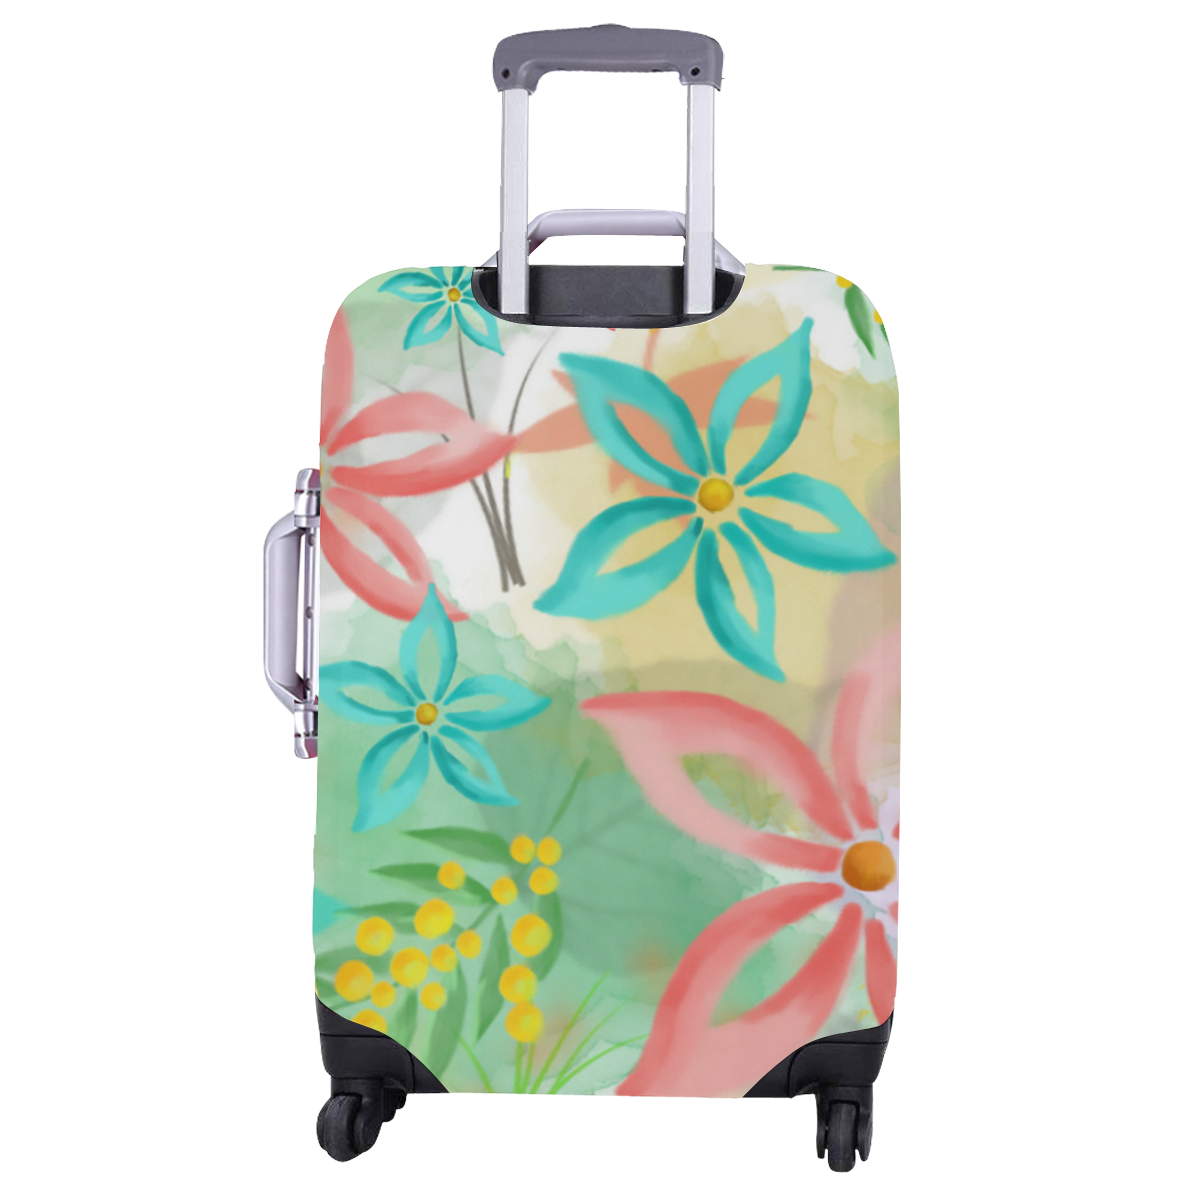 Flower Pattern - coral pink, teal green, yellow Luggage Cover/Large 26"-28"